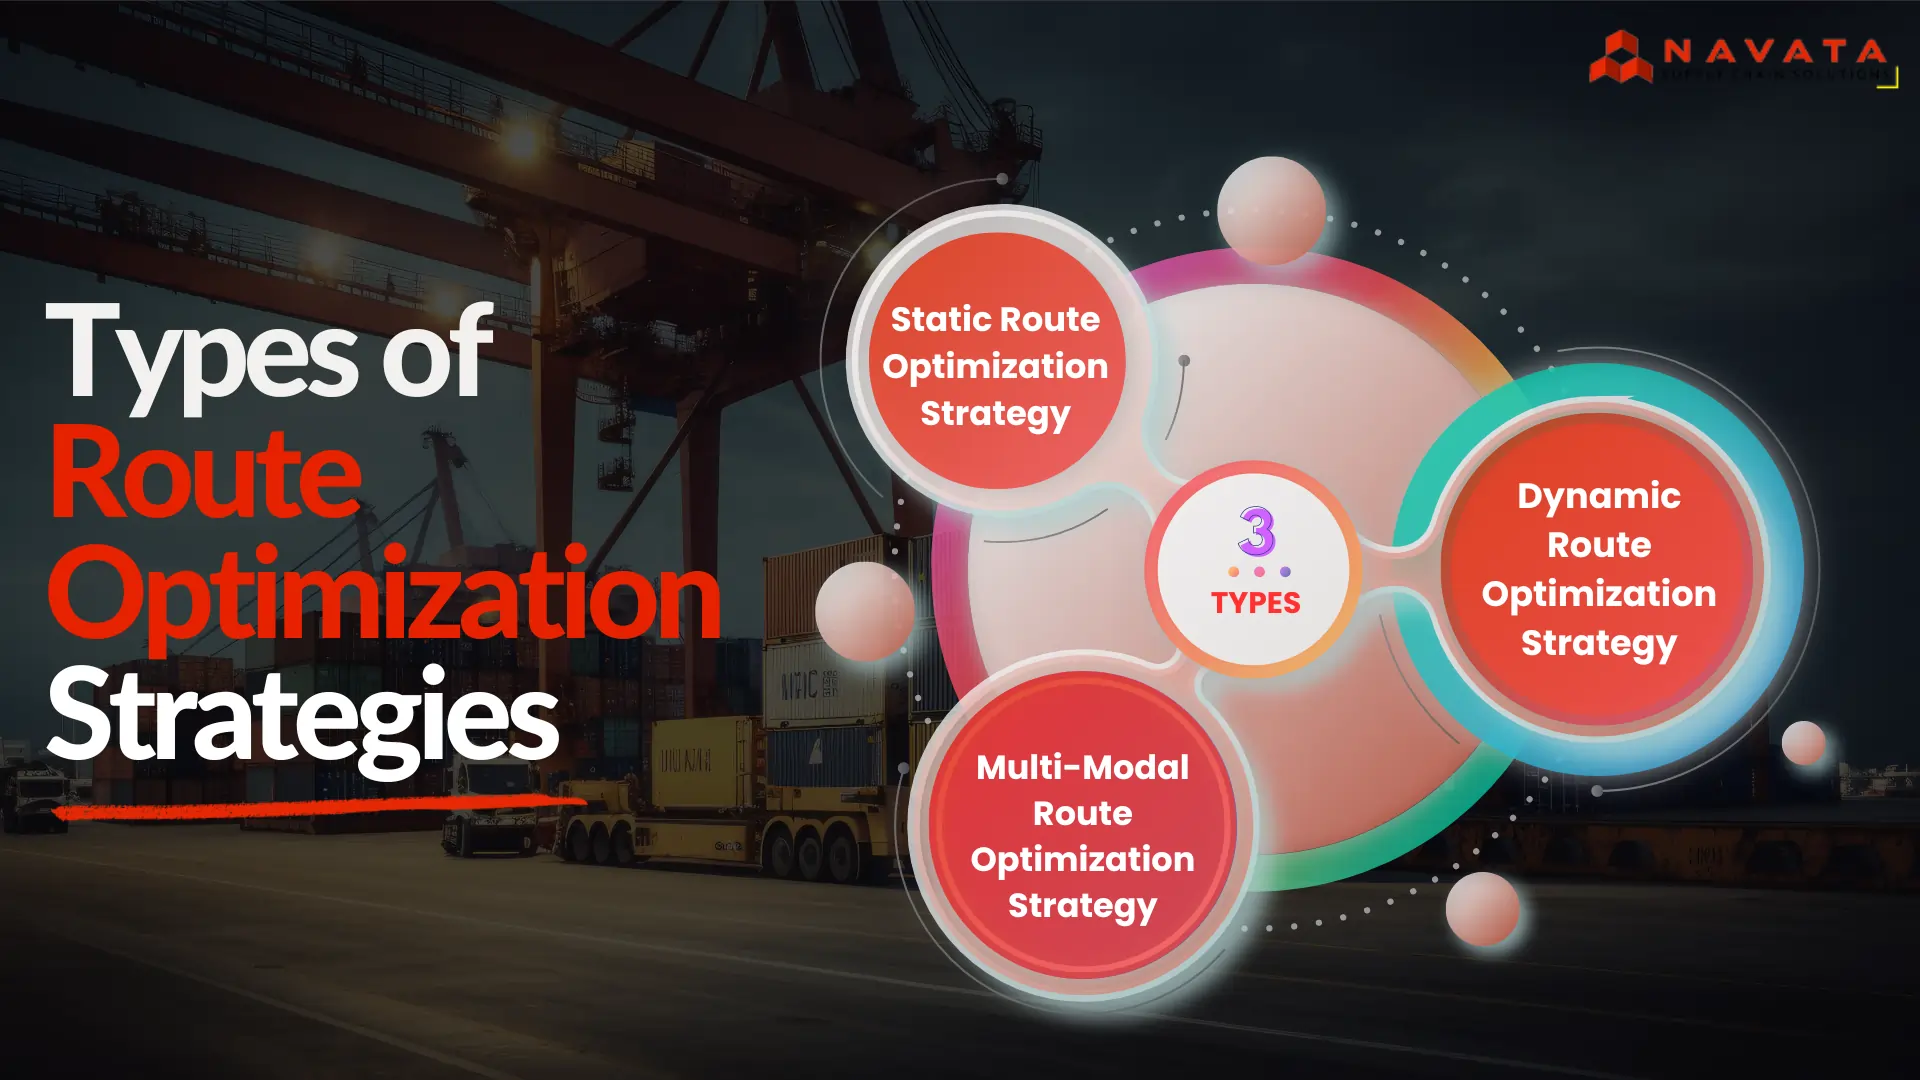 Types of Route Optimization Strategies